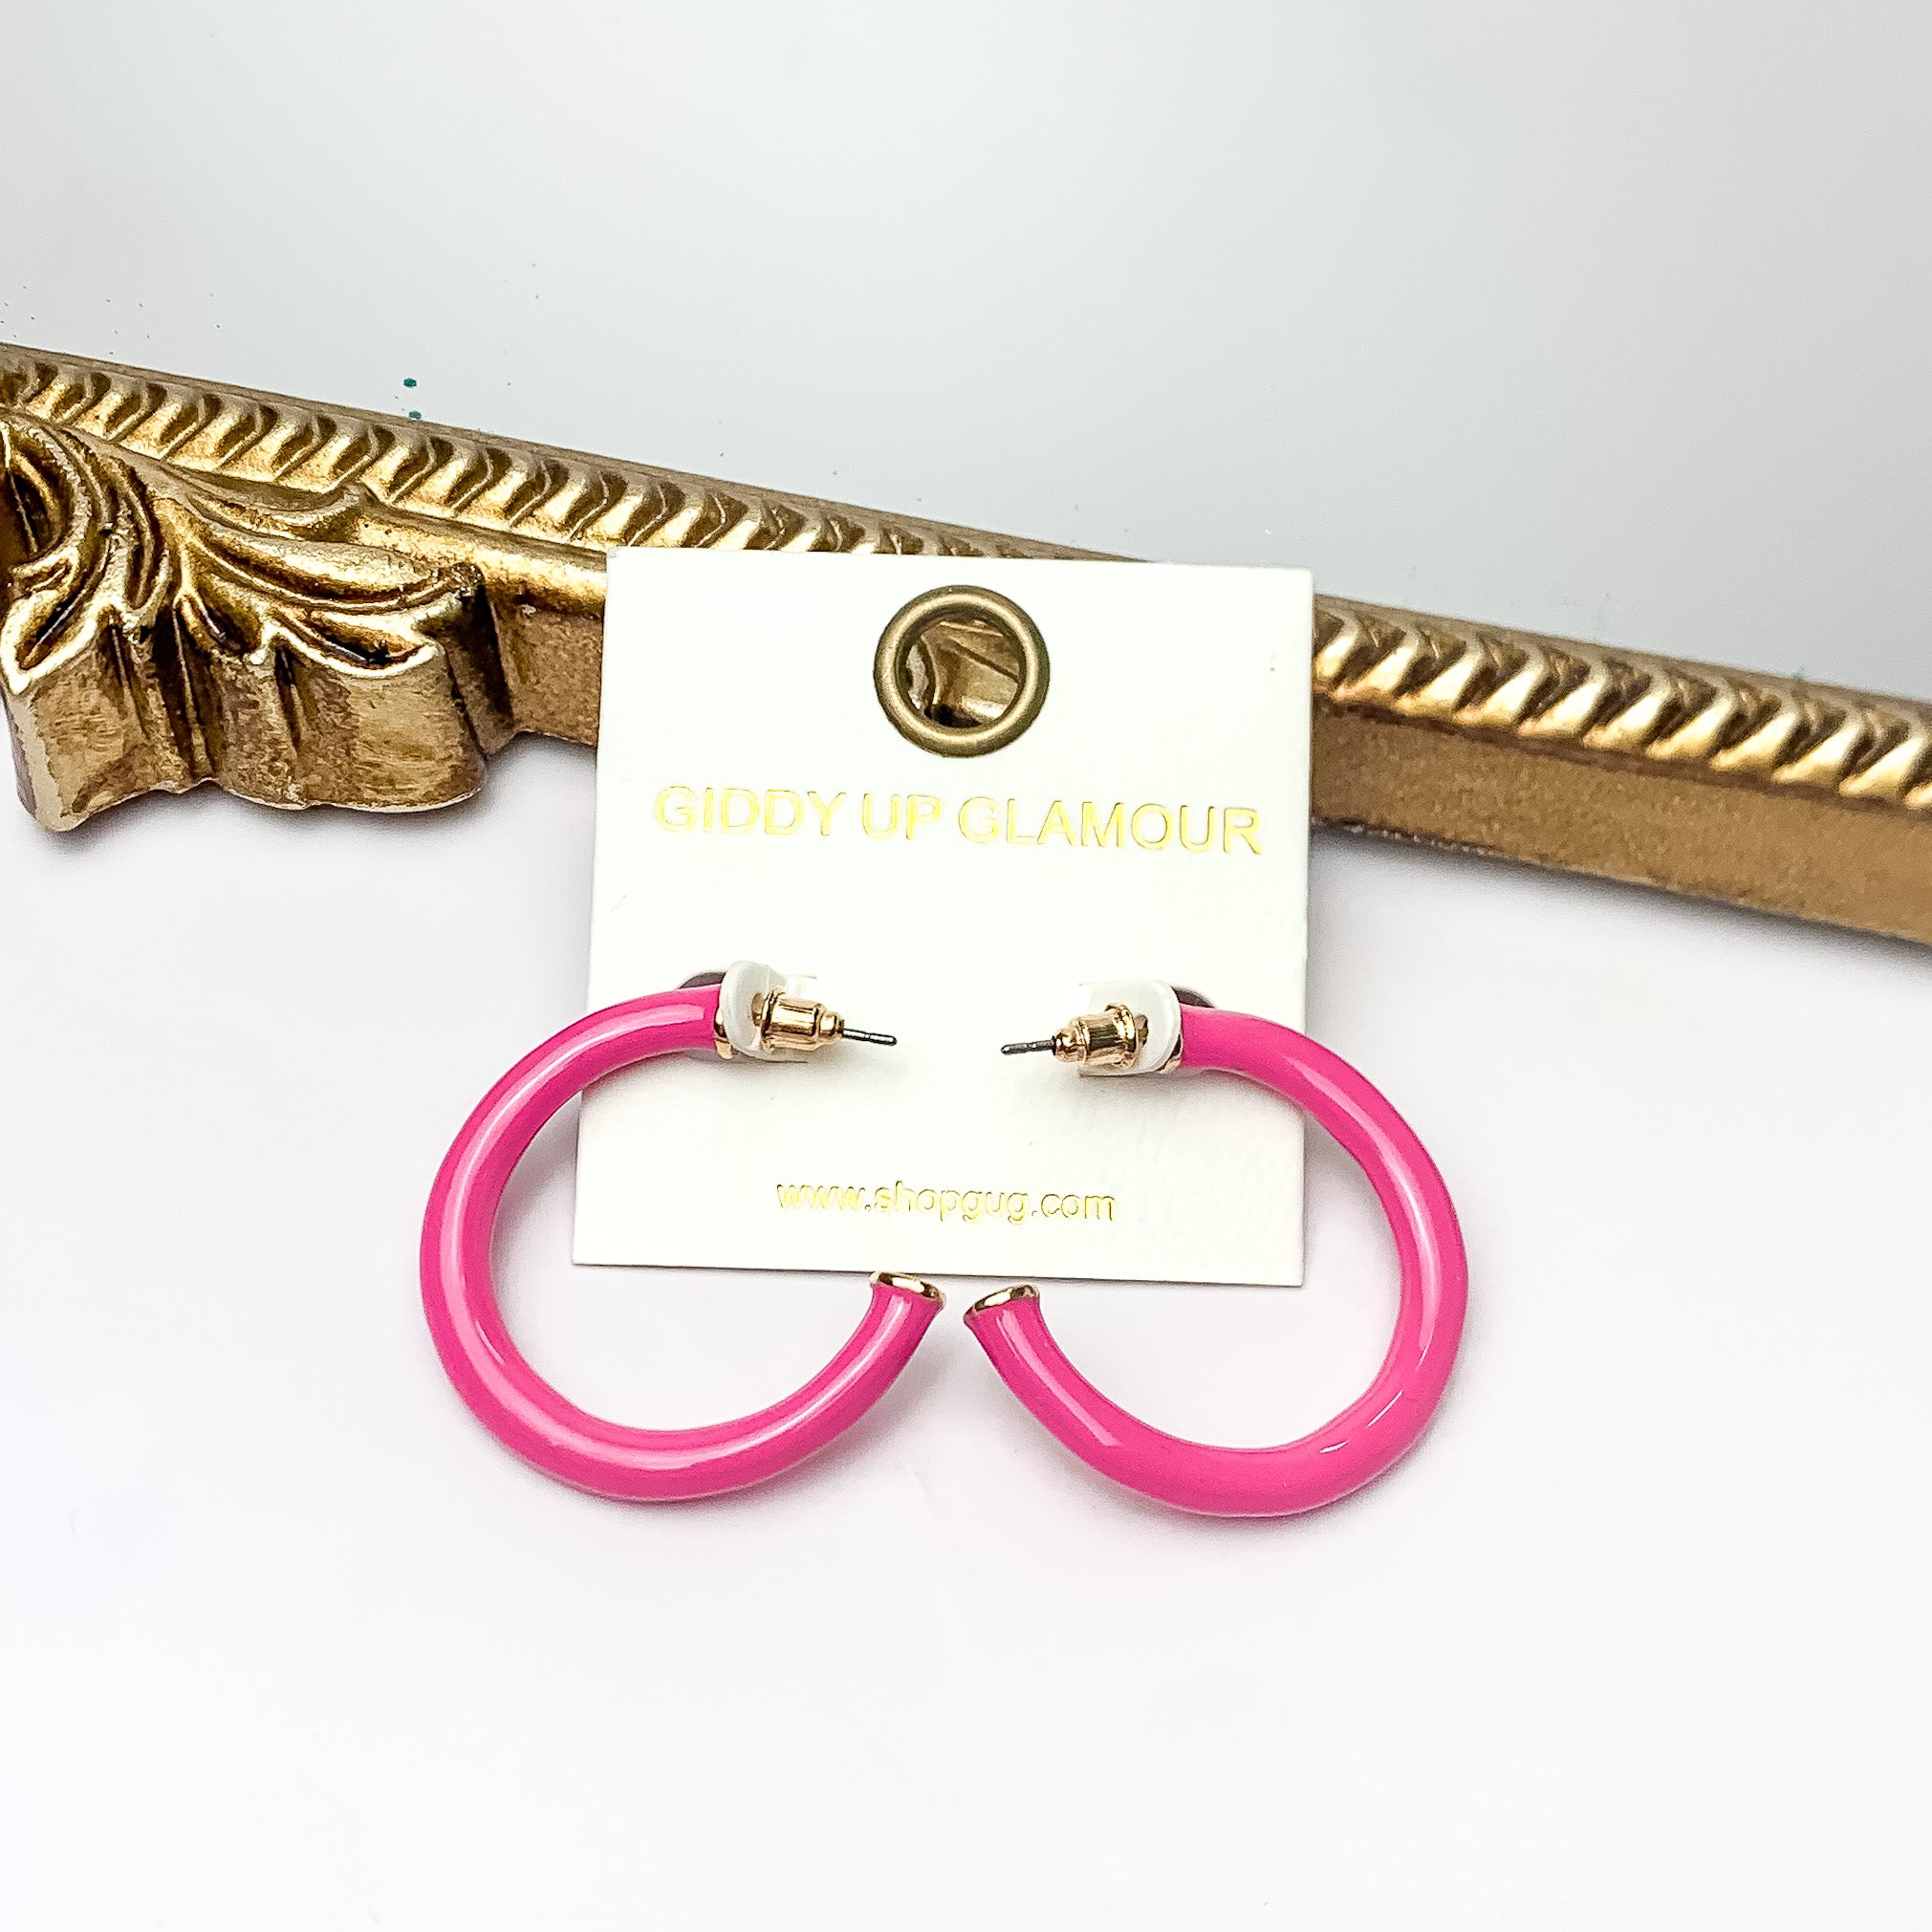 Plan For Cabo Small Hoop Earrings in Hot Pink. Pictured on a white background with a gold frame behind the earrings.